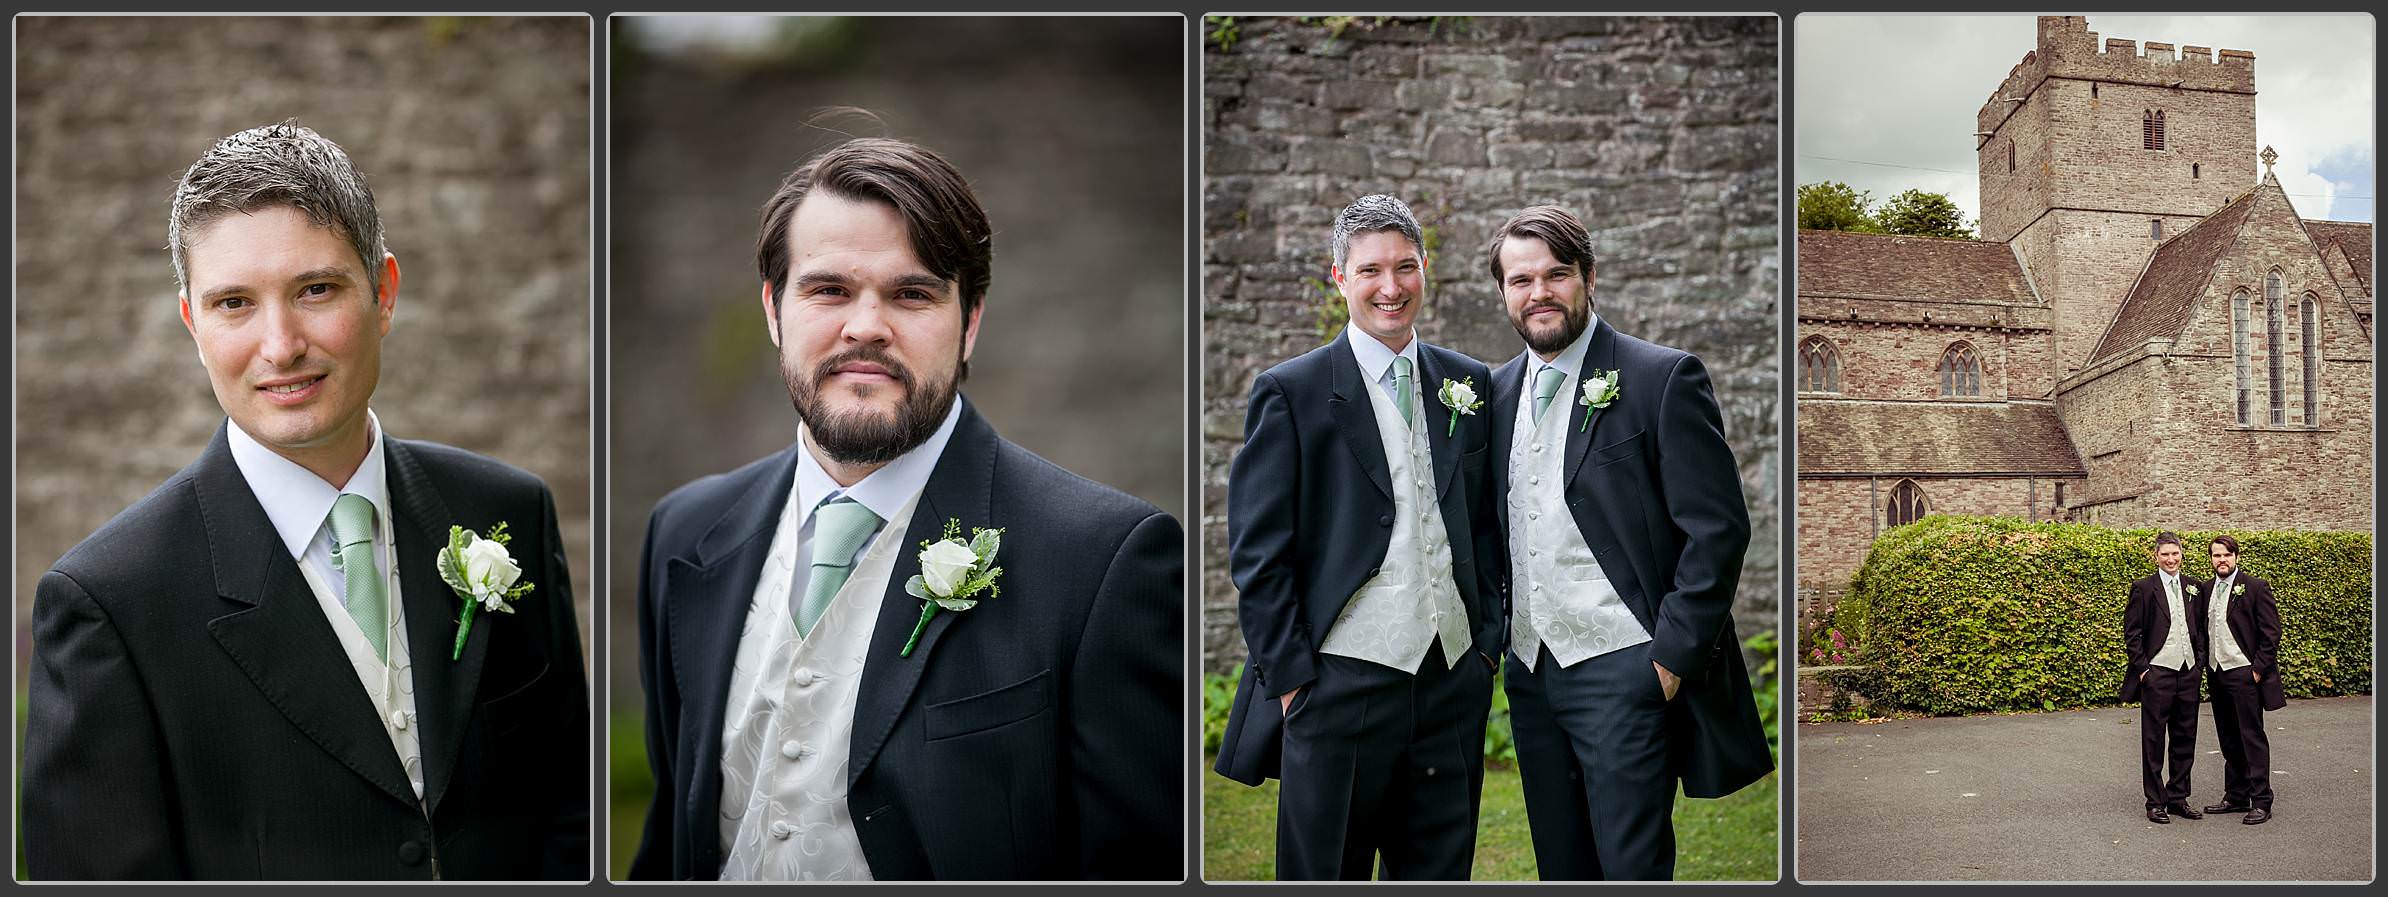 Groomsmen at Brecon Cathedral